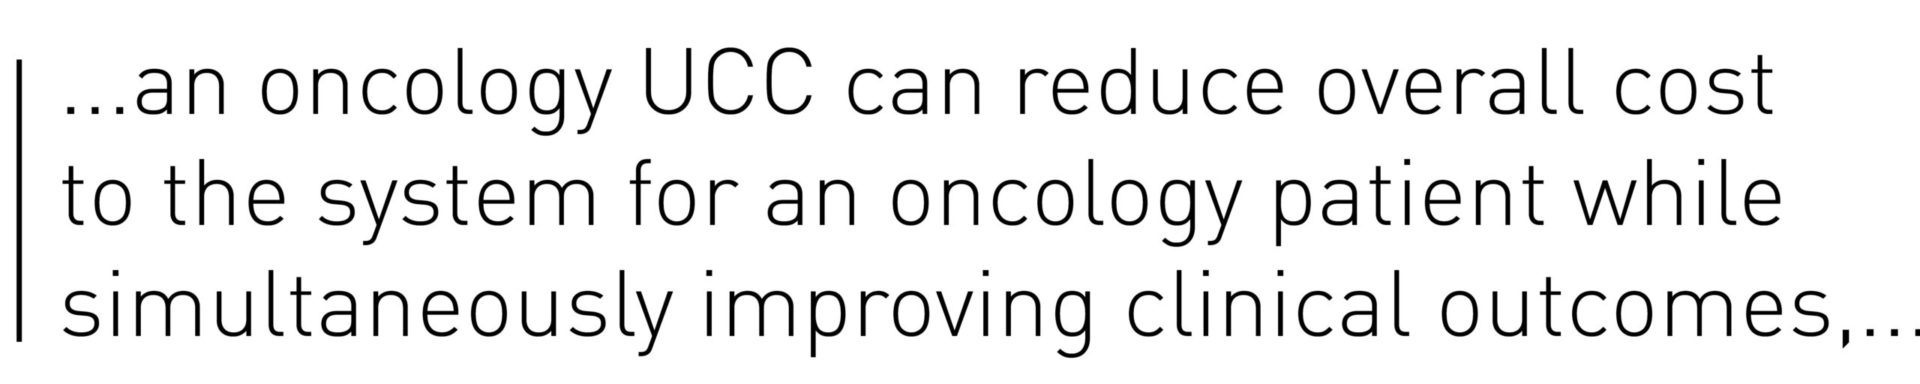 ...an oncology UCC can reduce overall cost to the system for an oncology patient while simultaneously improving clinical outcomes,...